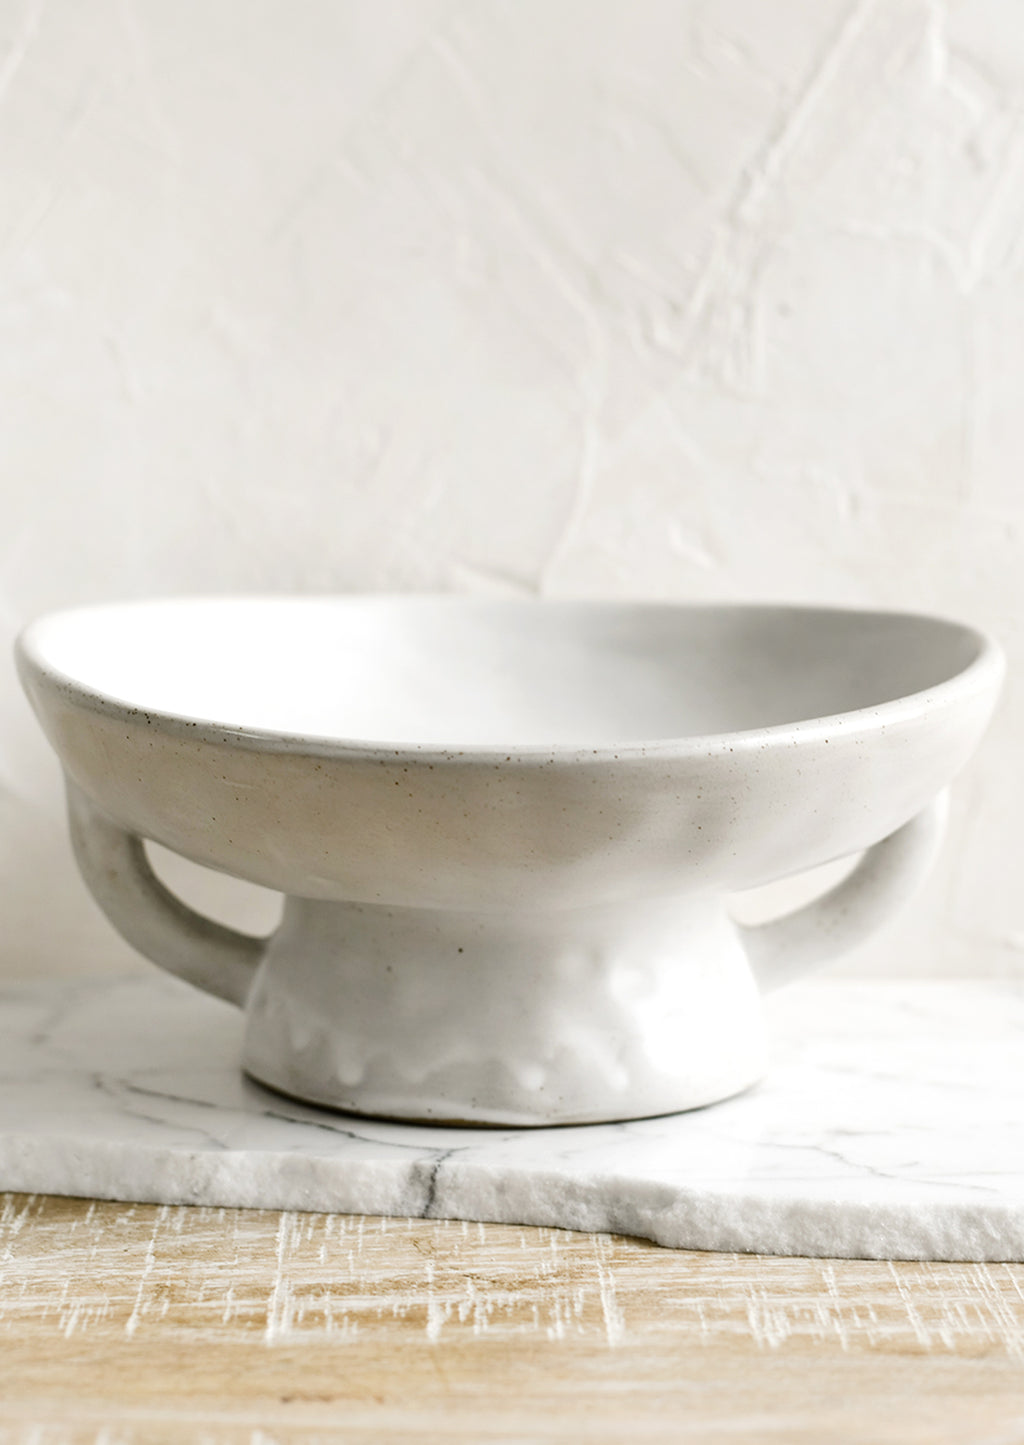 2: A white footed ceramic bowl.